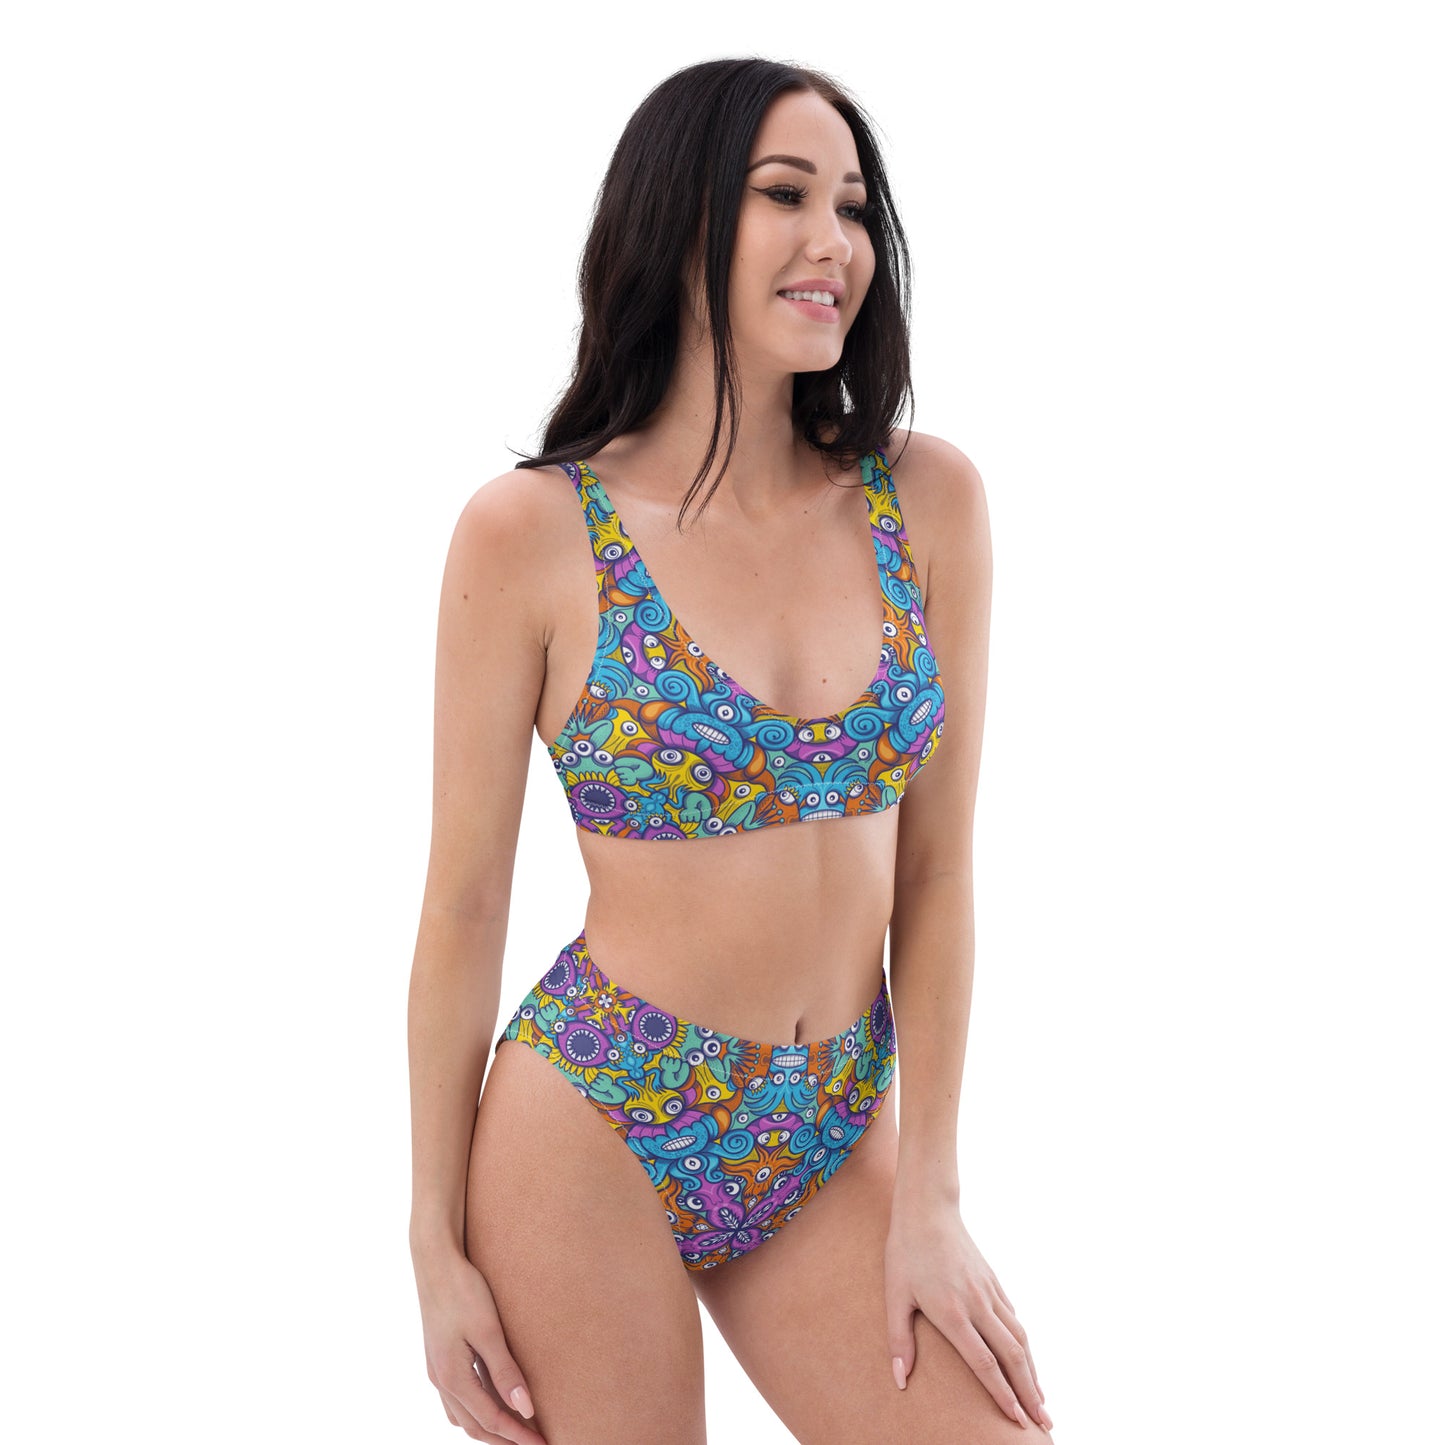 The ultimate sea beasts cast from the deep end of the ocean Recycled high-waisted bikini. Side view